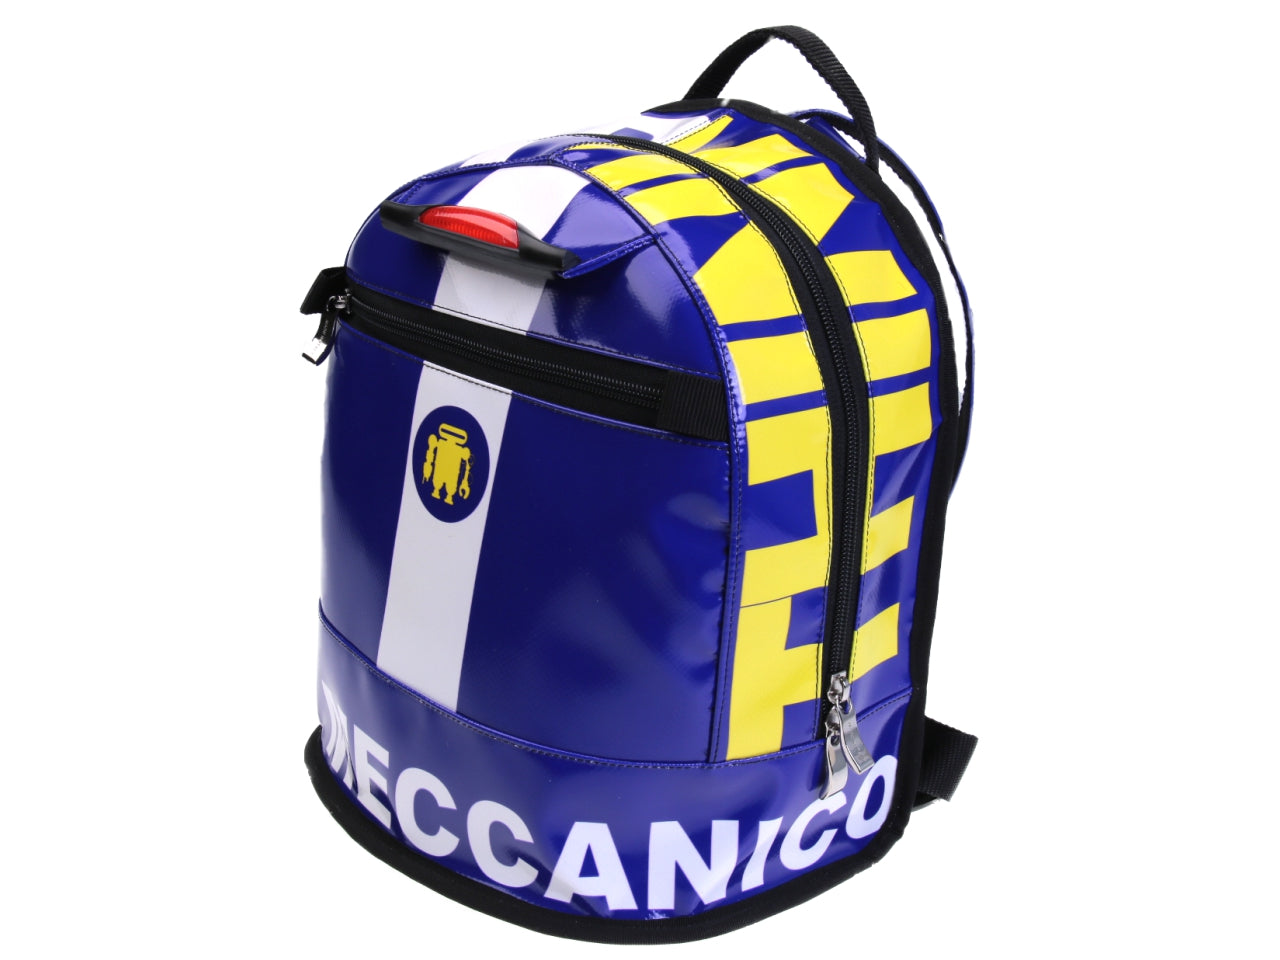 ROYAL BACKPACK MODEL SUPERINO MADE OF LORRY TARPAULIN. - Limited Edition Paul Meccanico